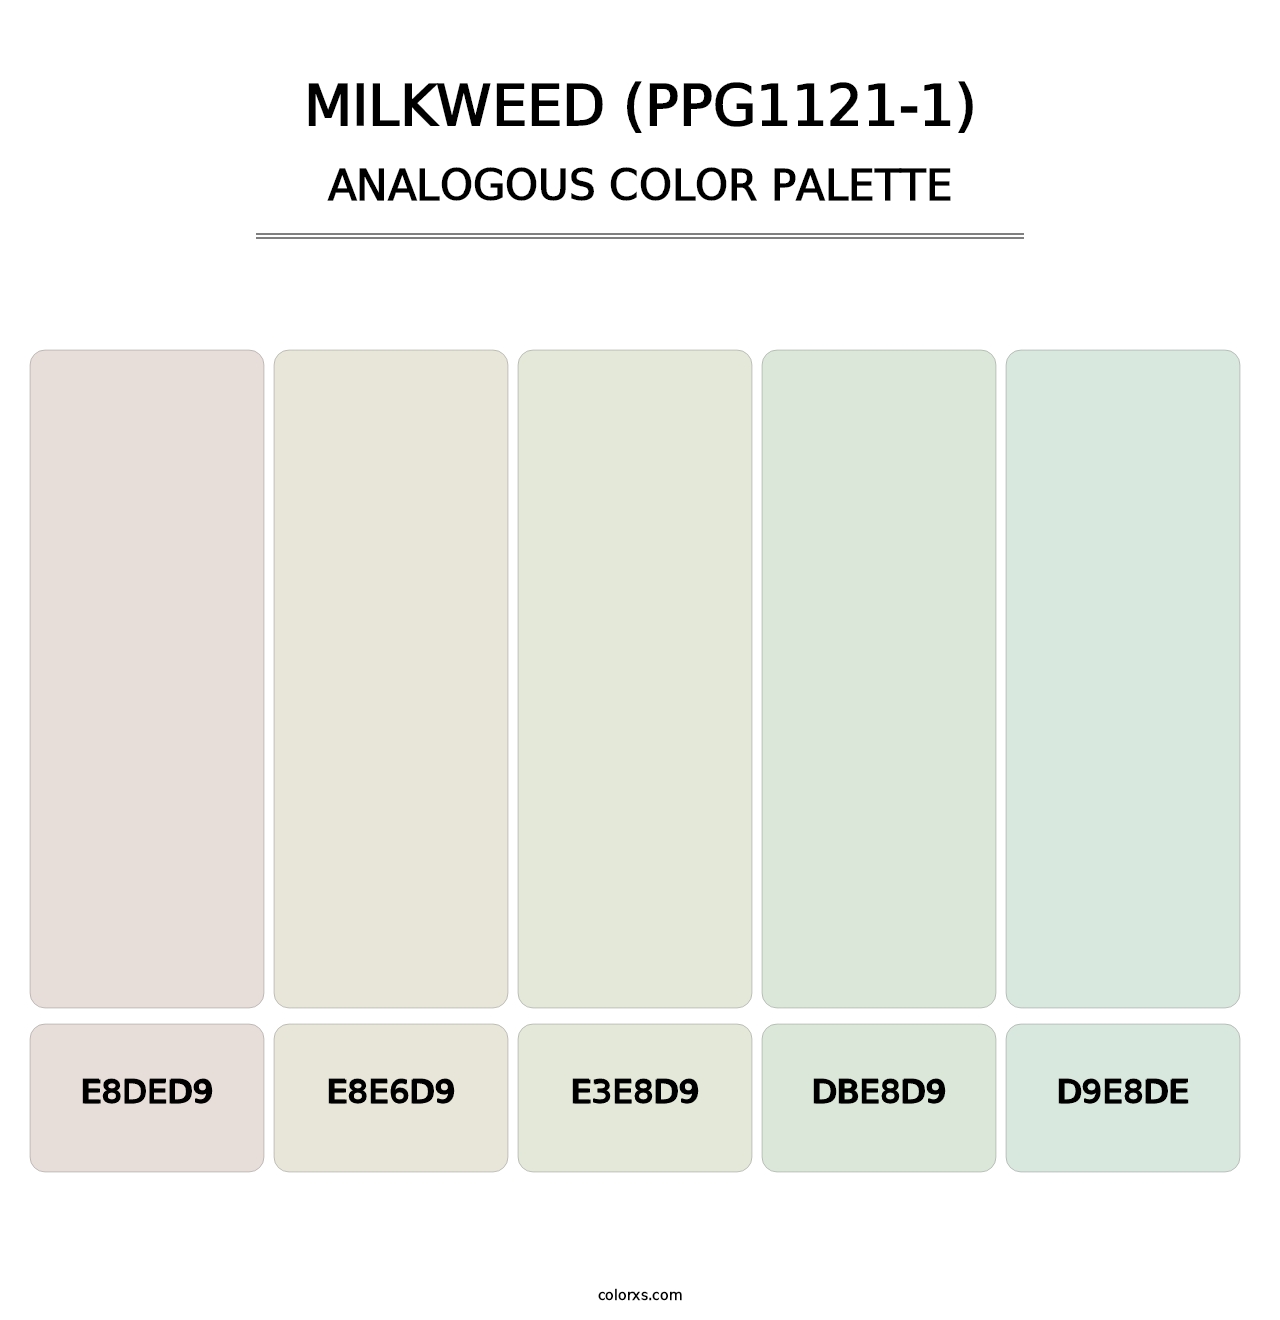 Milkweed (PPG1121-1) - Analogous Color Palette